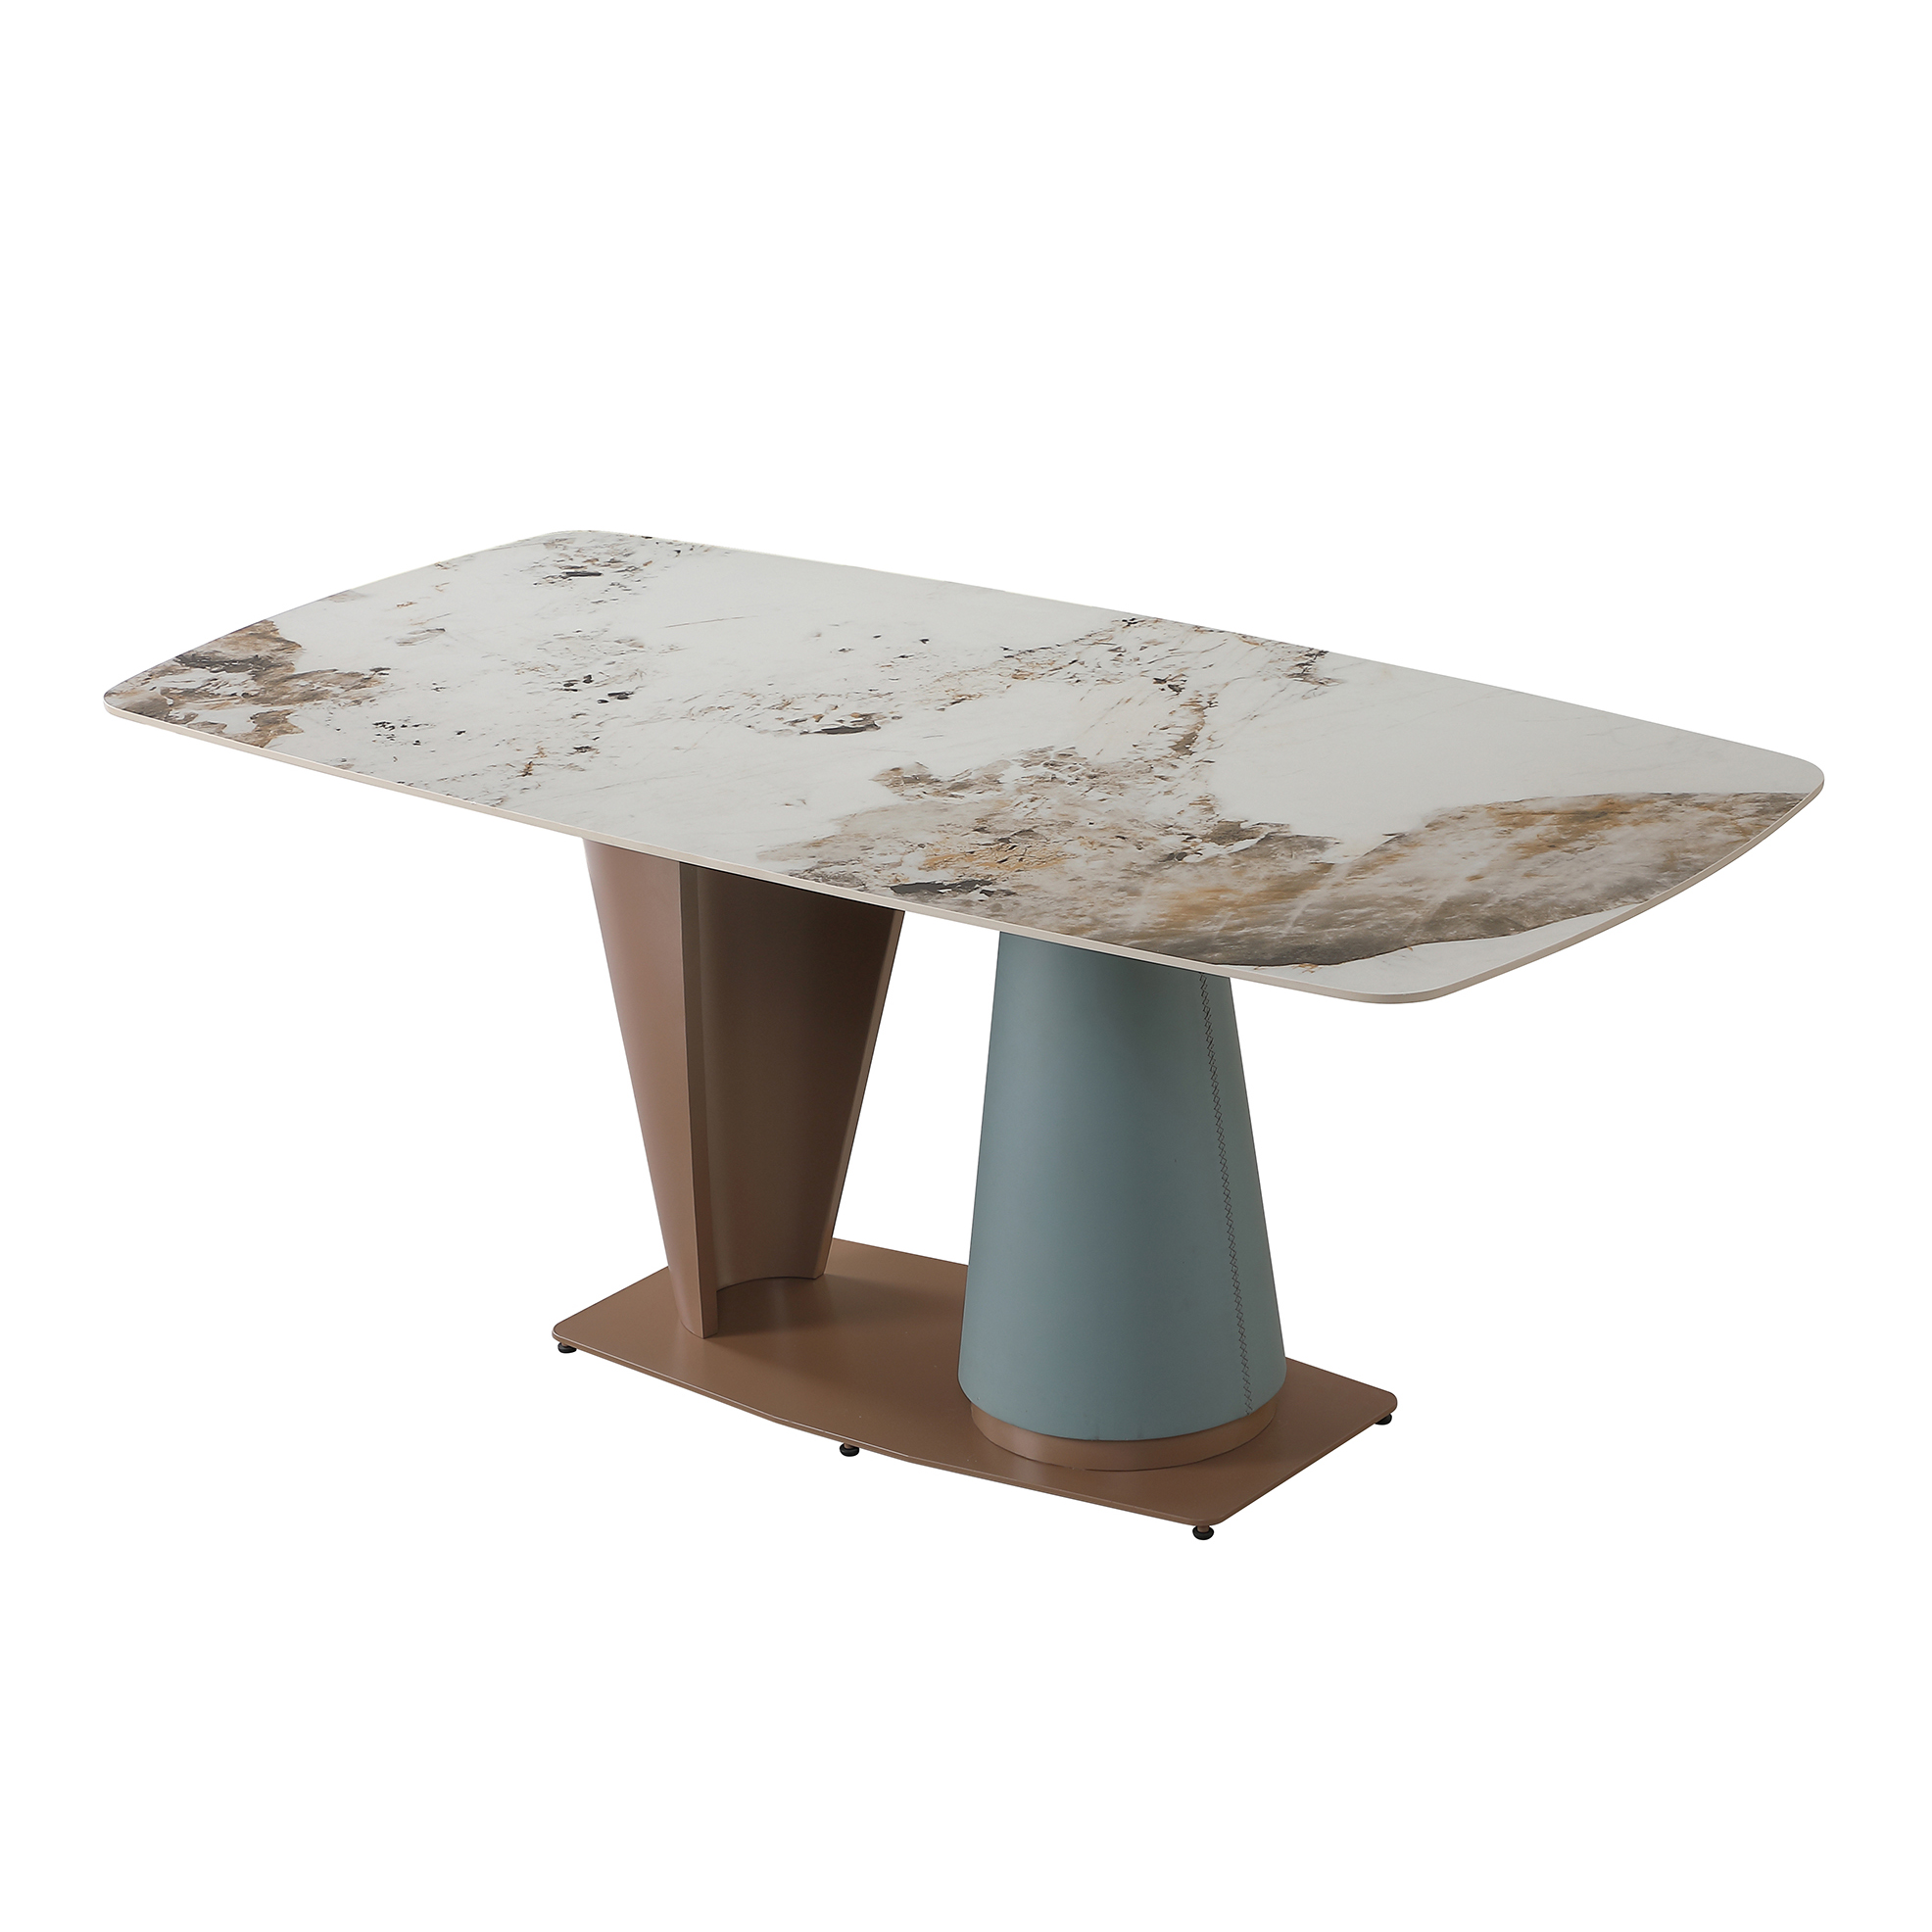 Montary® 71" Pandora Color Sintered Stone Dining Table